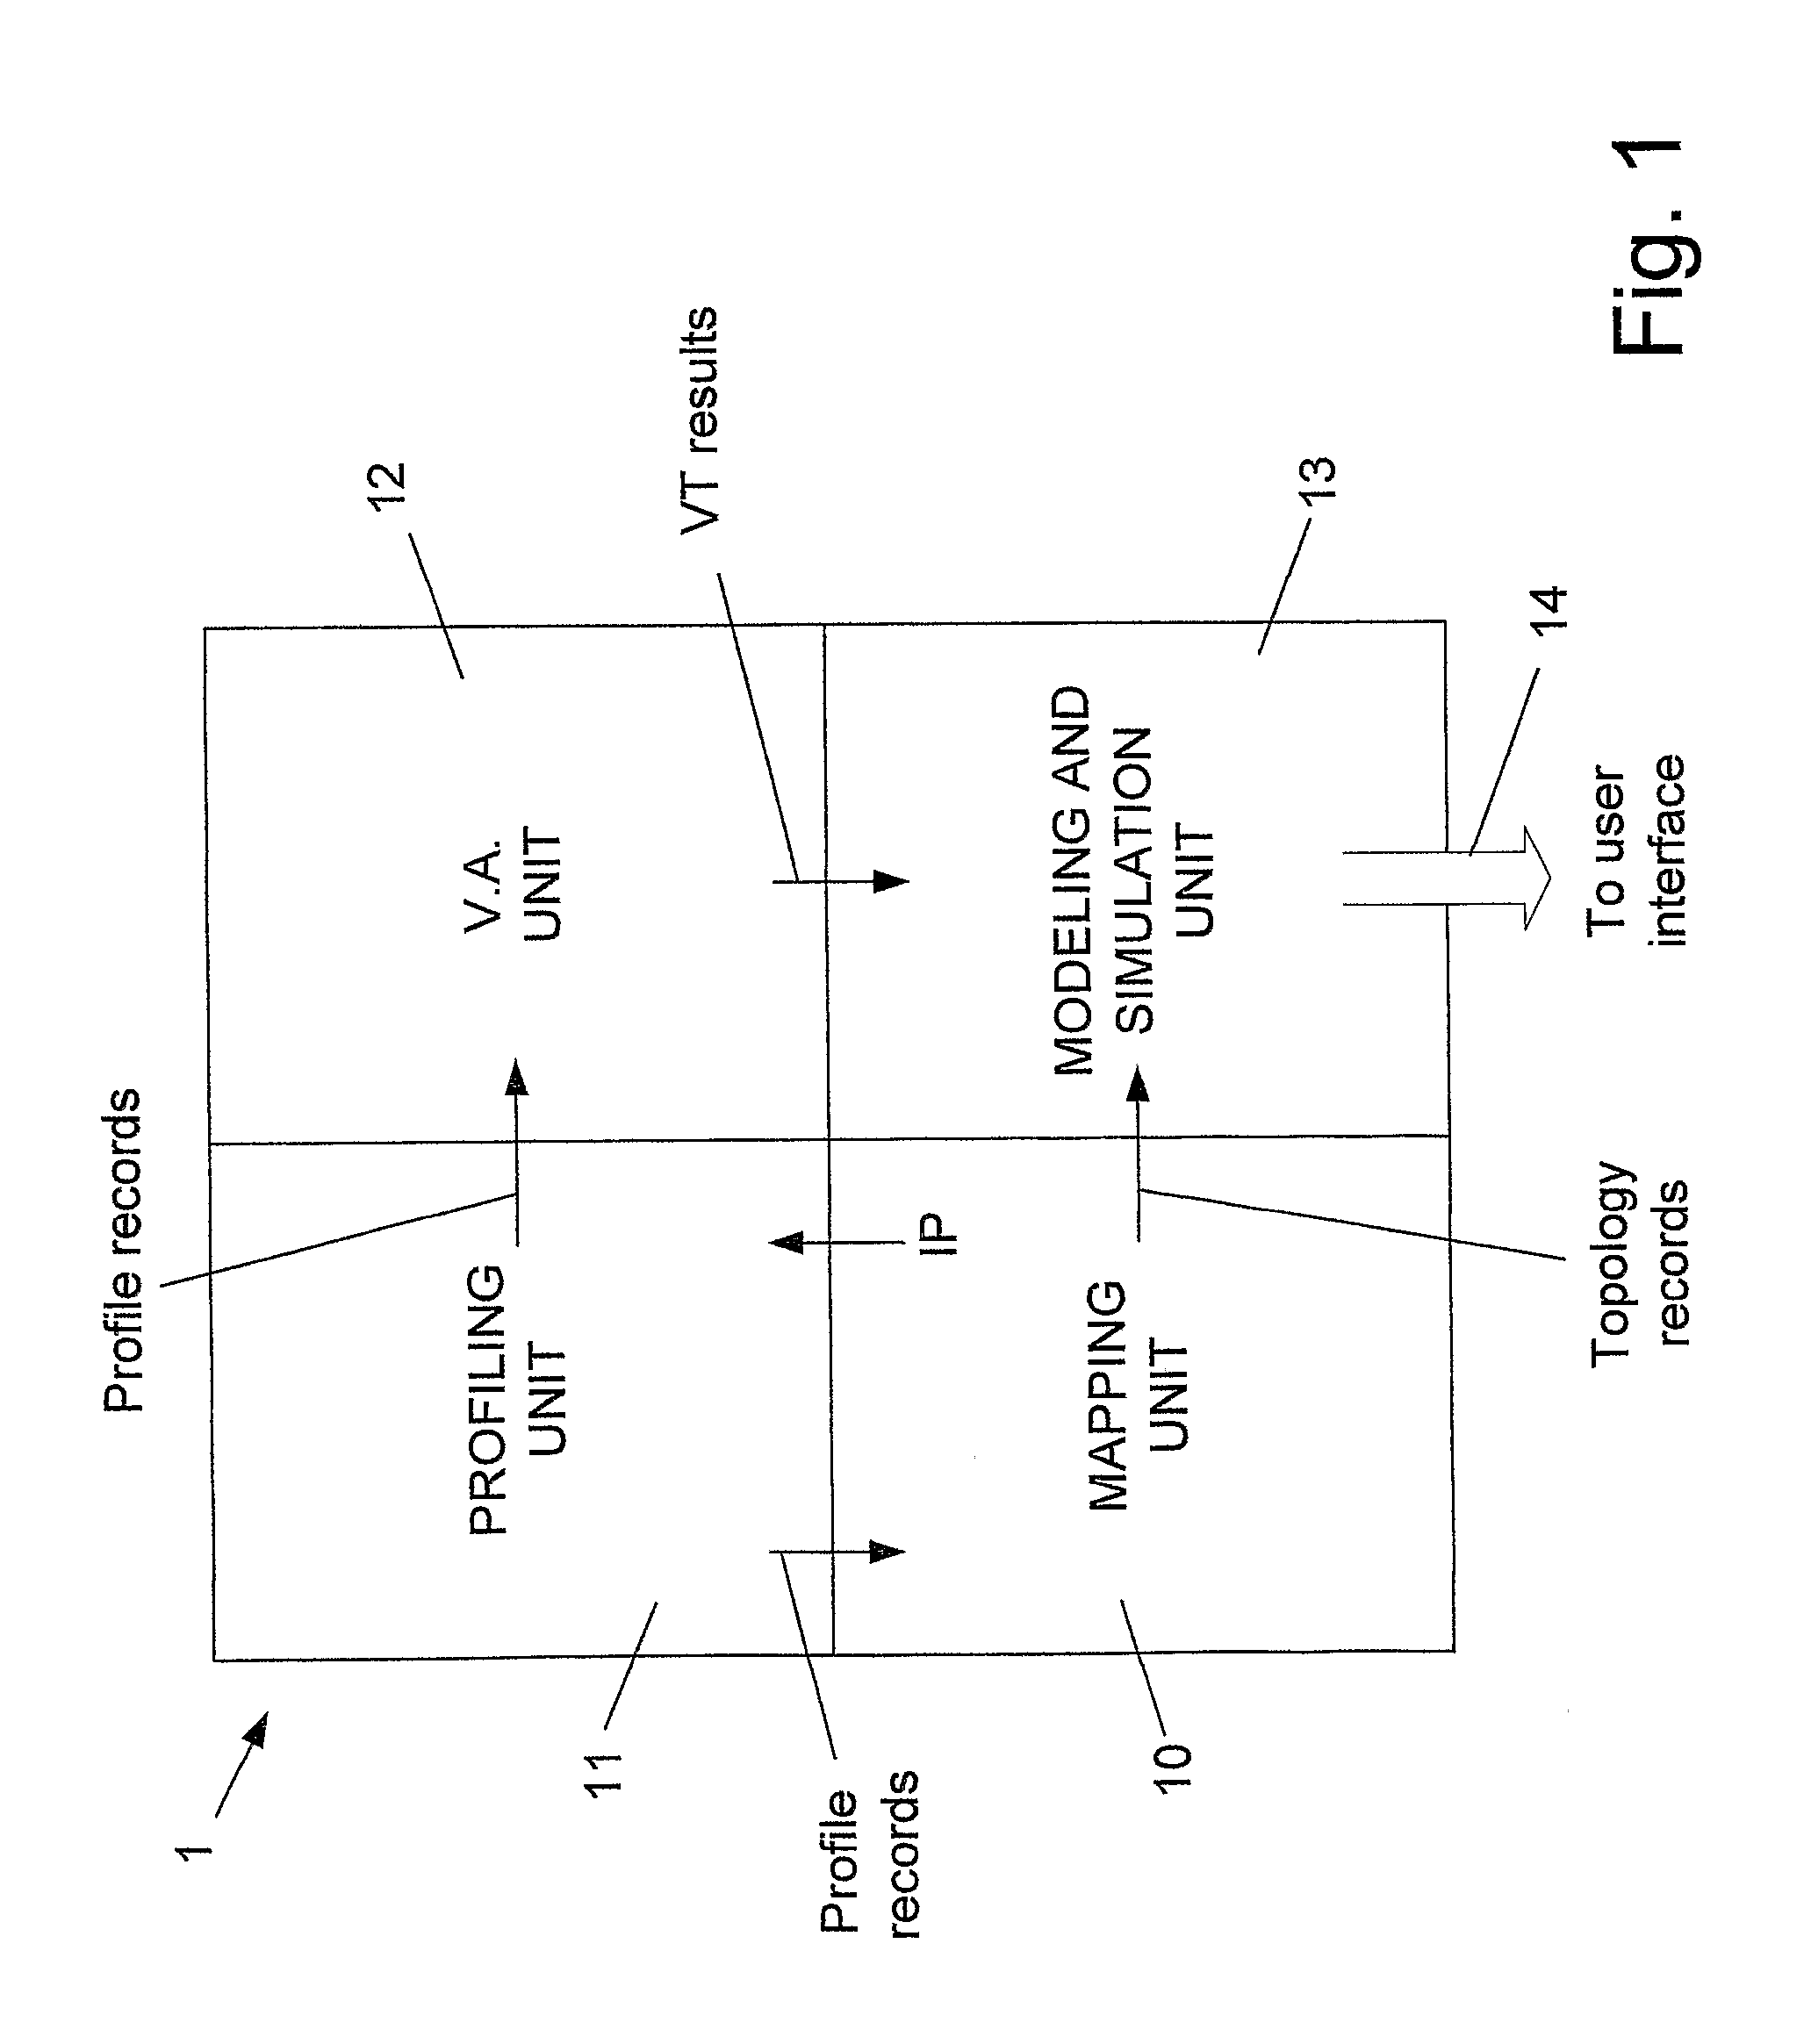 Method and System For Network Vulnerability Assessment